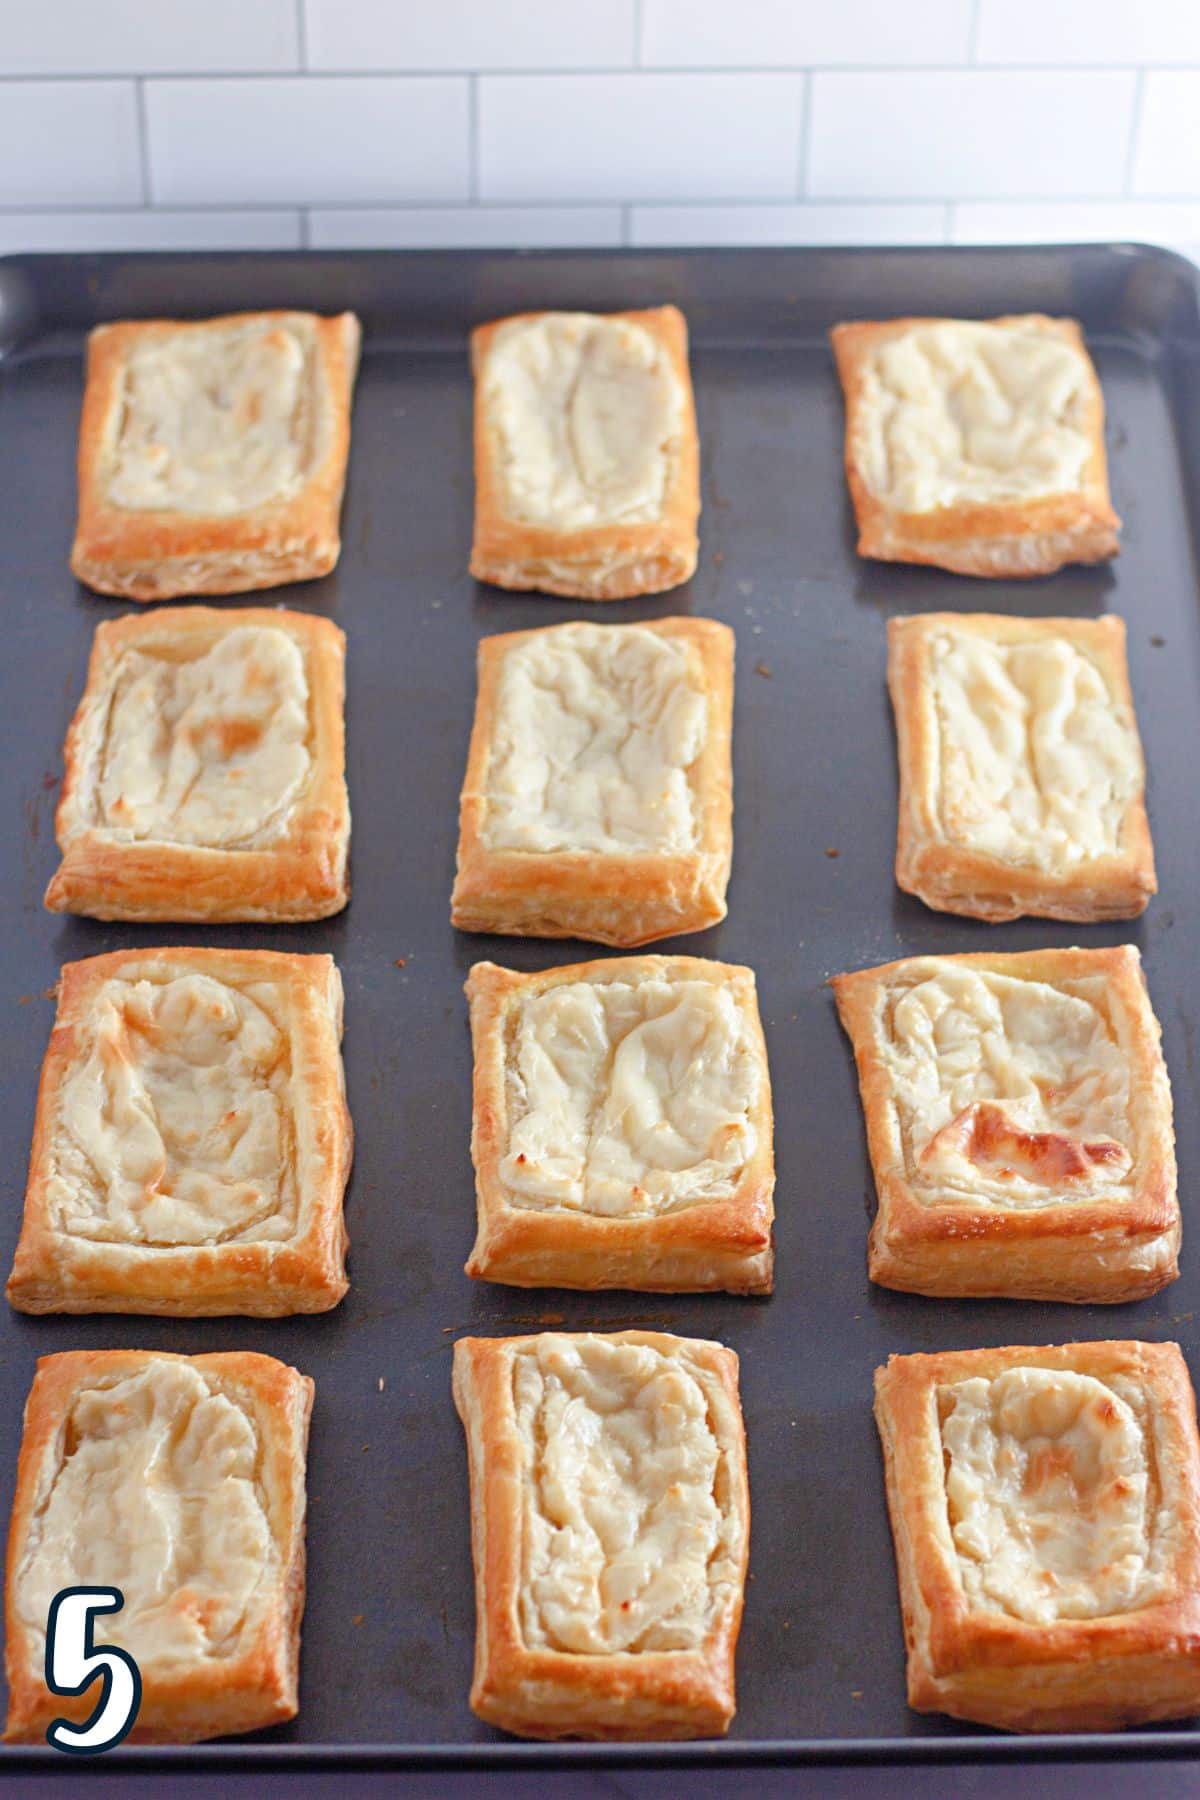 Just baked pastries with cream cheese filling on a baking sheet. 